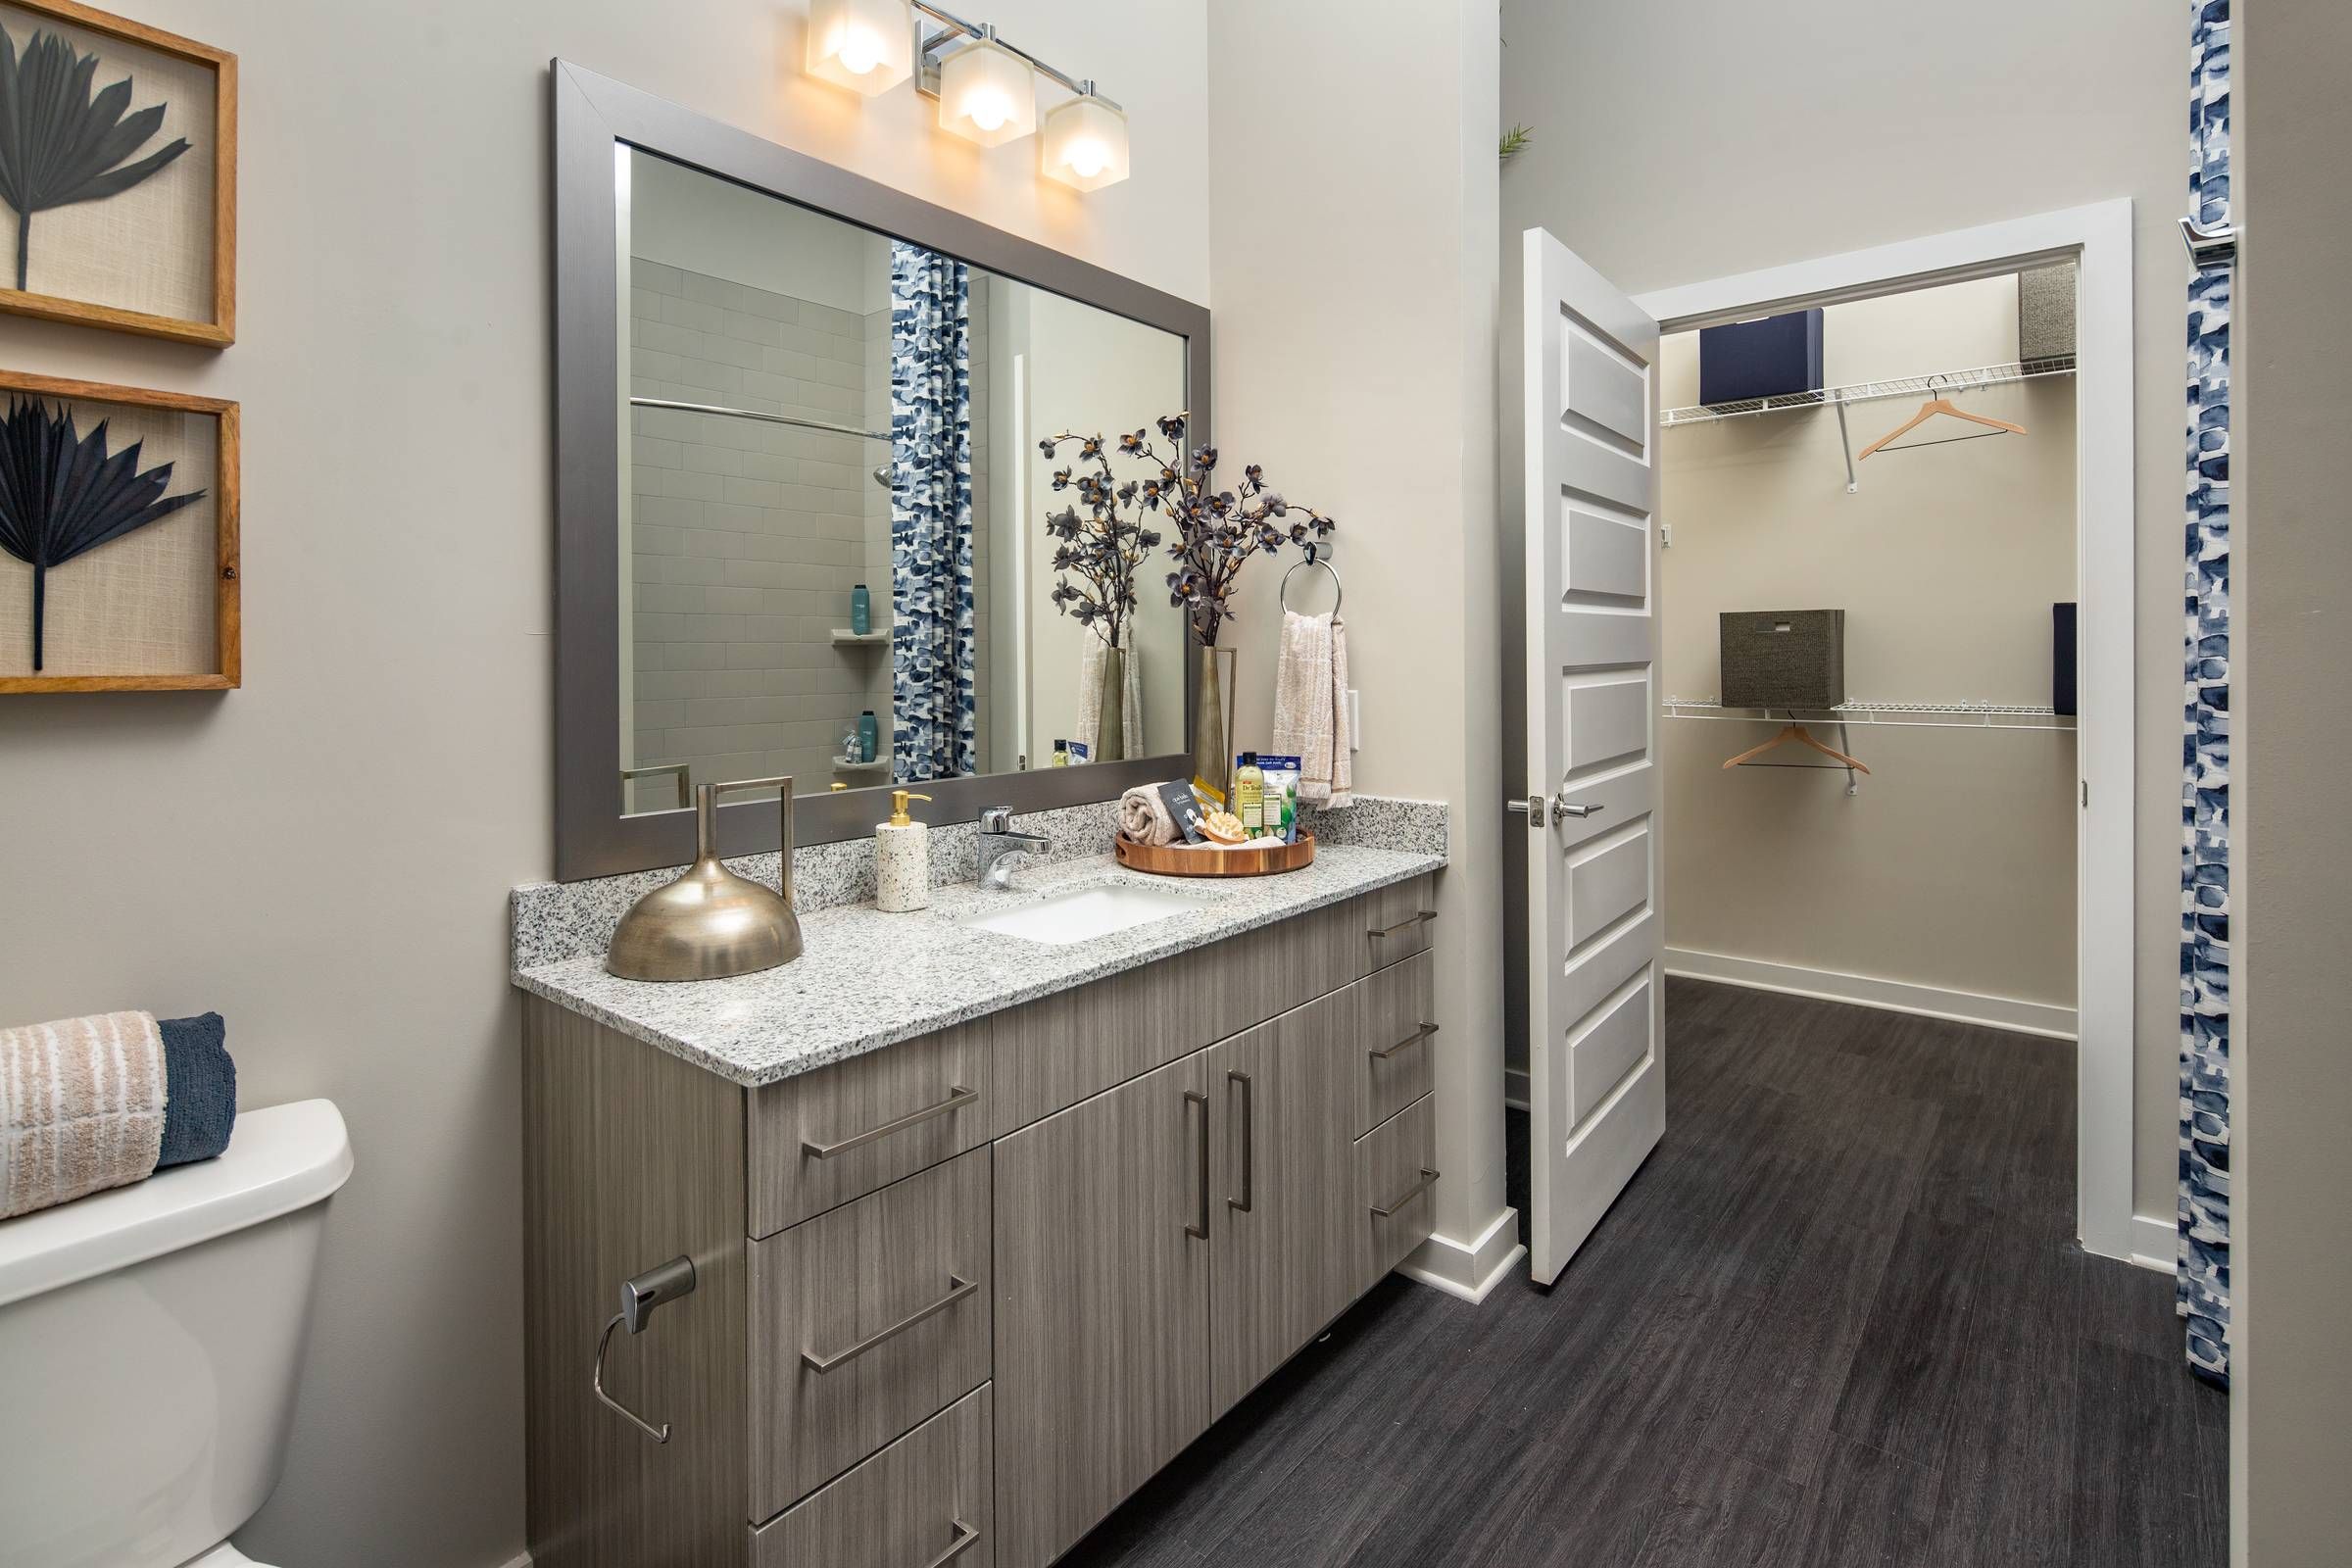 The bathroom at Alta Sugarloaf shows a large mirror, under-mount sink, and ample cabinetry, with a walk-in closet visible in the background.